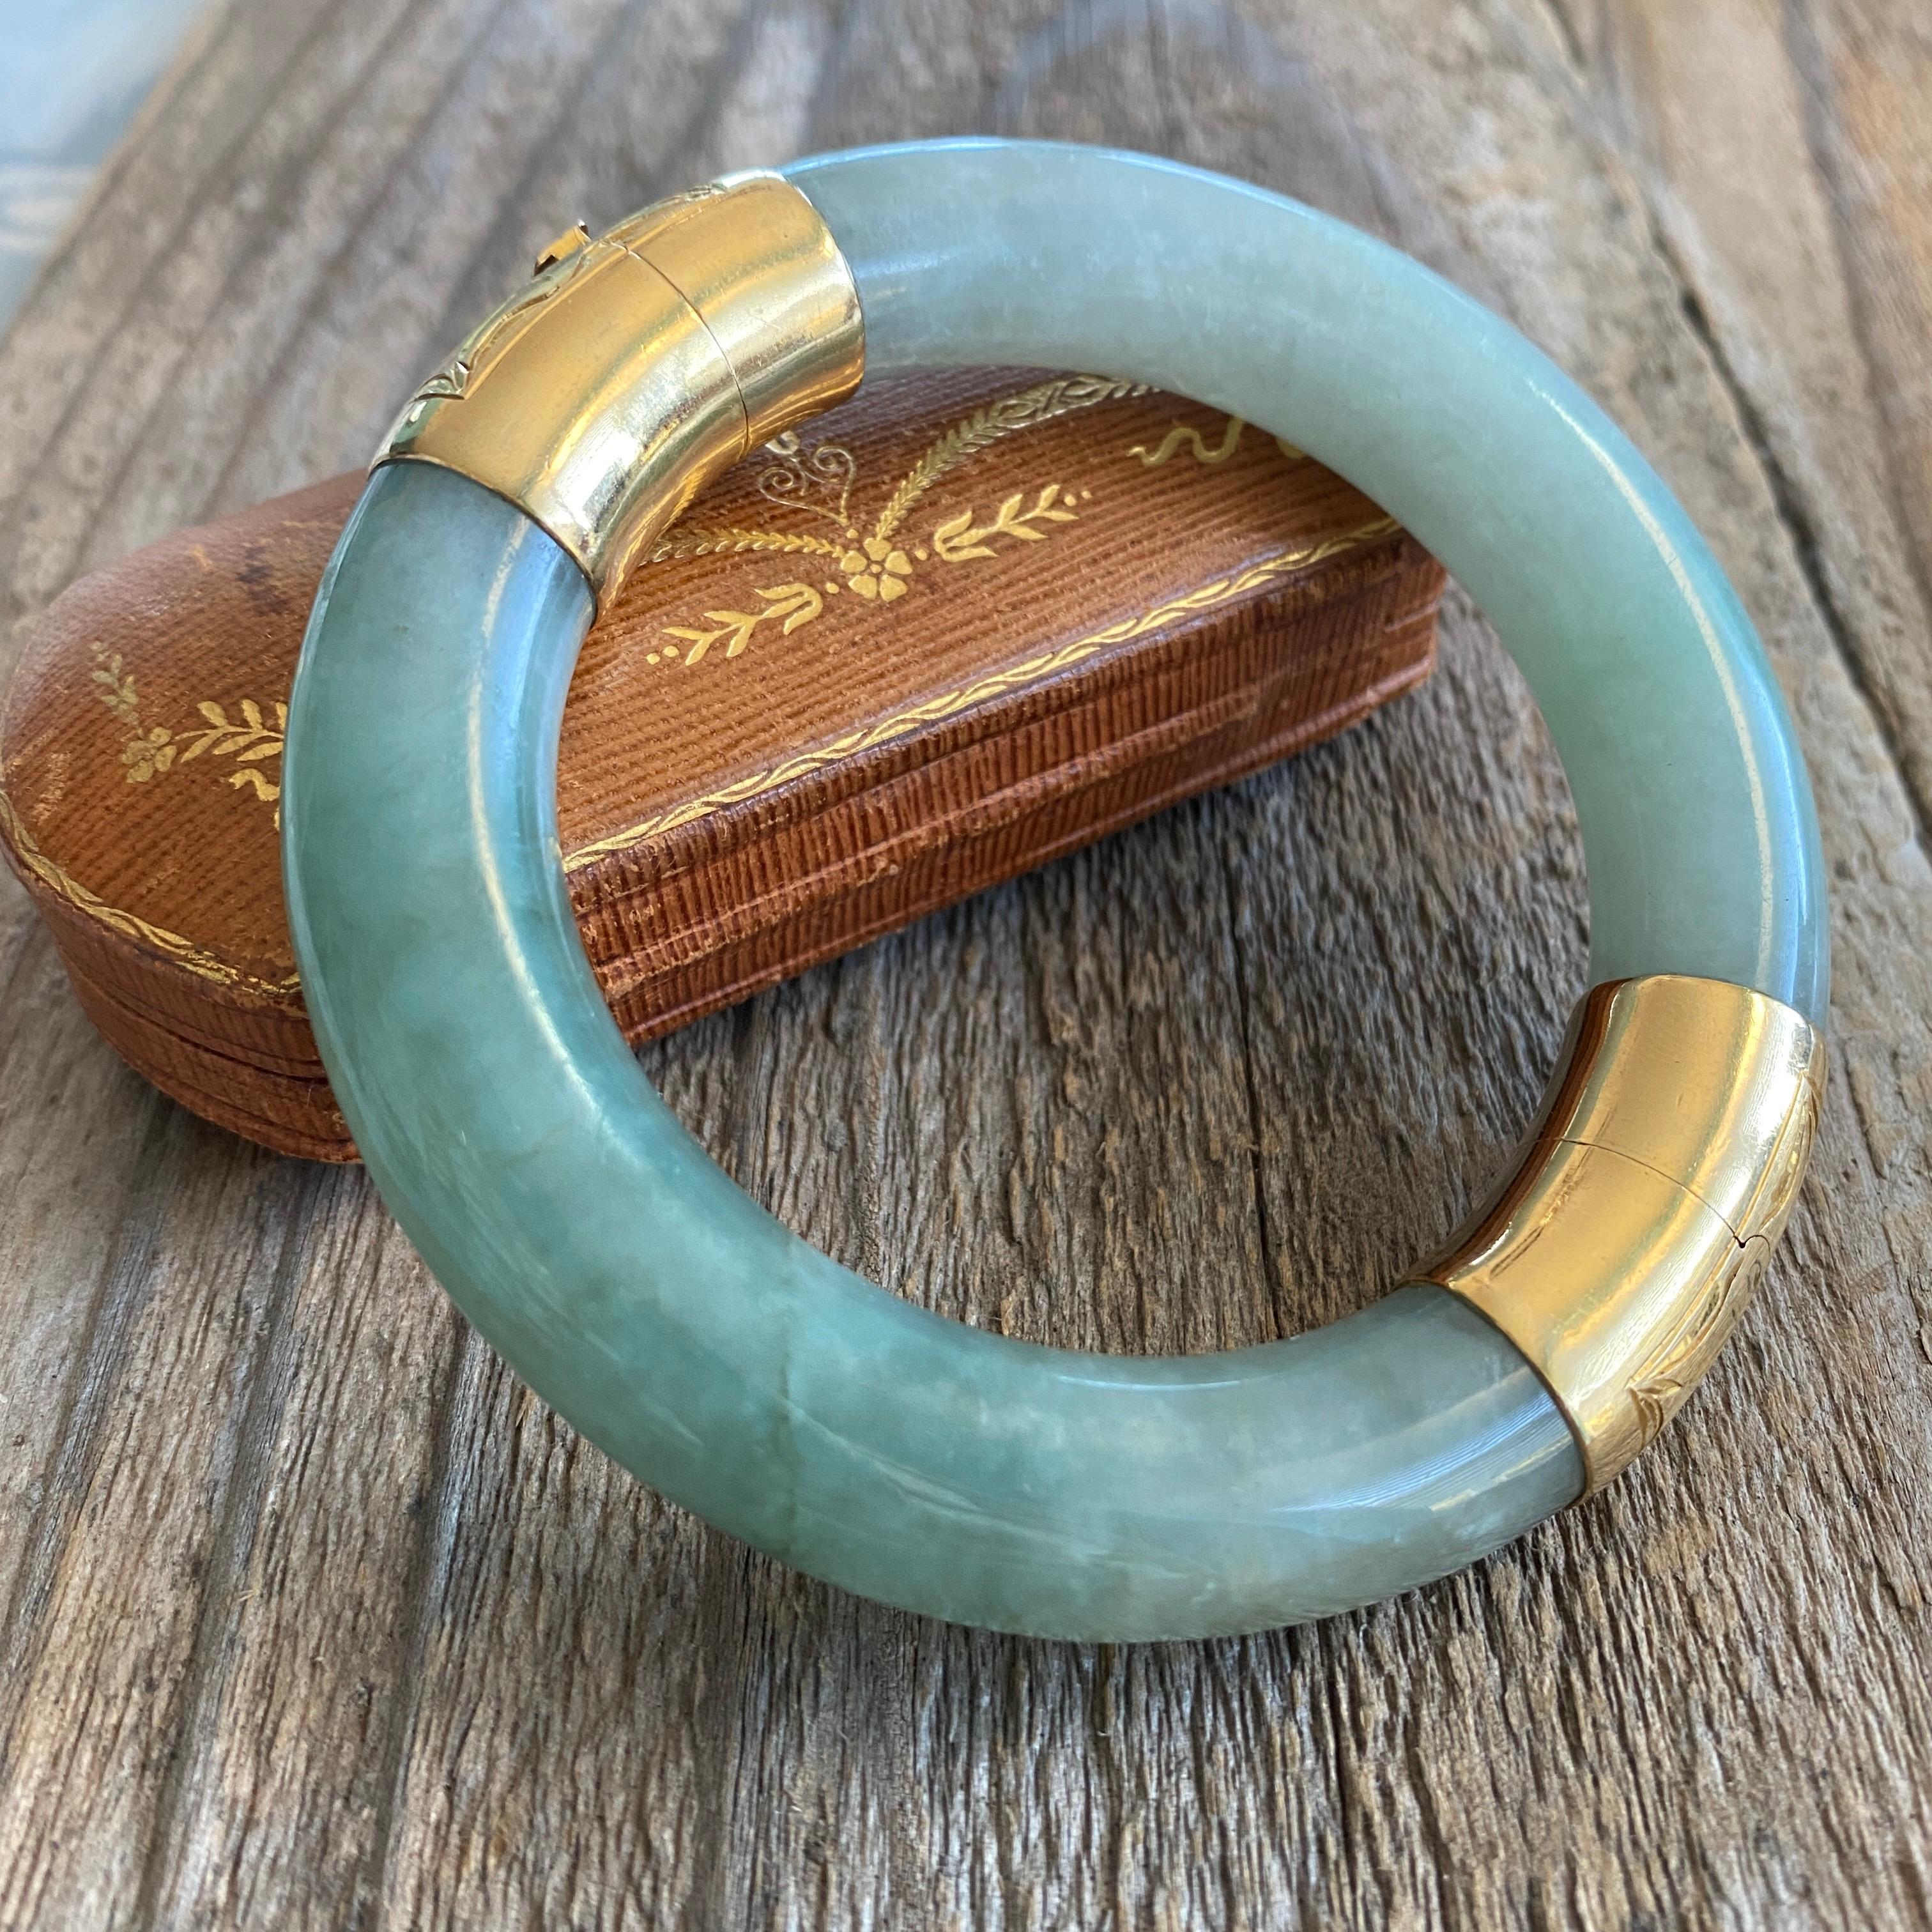 Details:
Fabulous heavy vintage green Jade Jadeite bangle bracelet with a 14K gold clasp and hinge. Mid century green jade with beautiful marbling, bangle bracelet, and it has a nice solid clasp with a safety chain. The bracelet is stamped 585 on